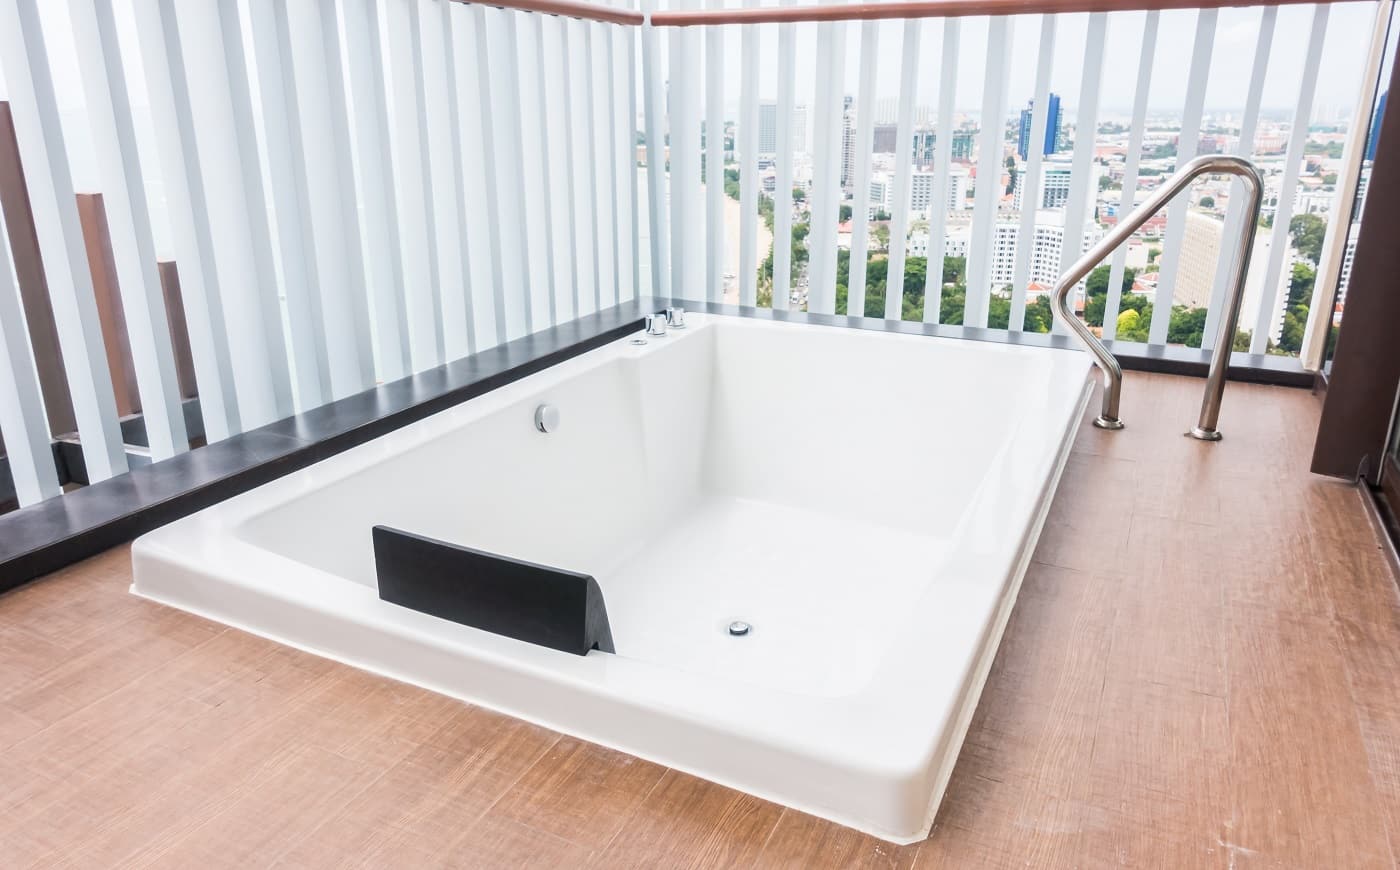 White bathtub decoration with outdoor view at patio and terrace